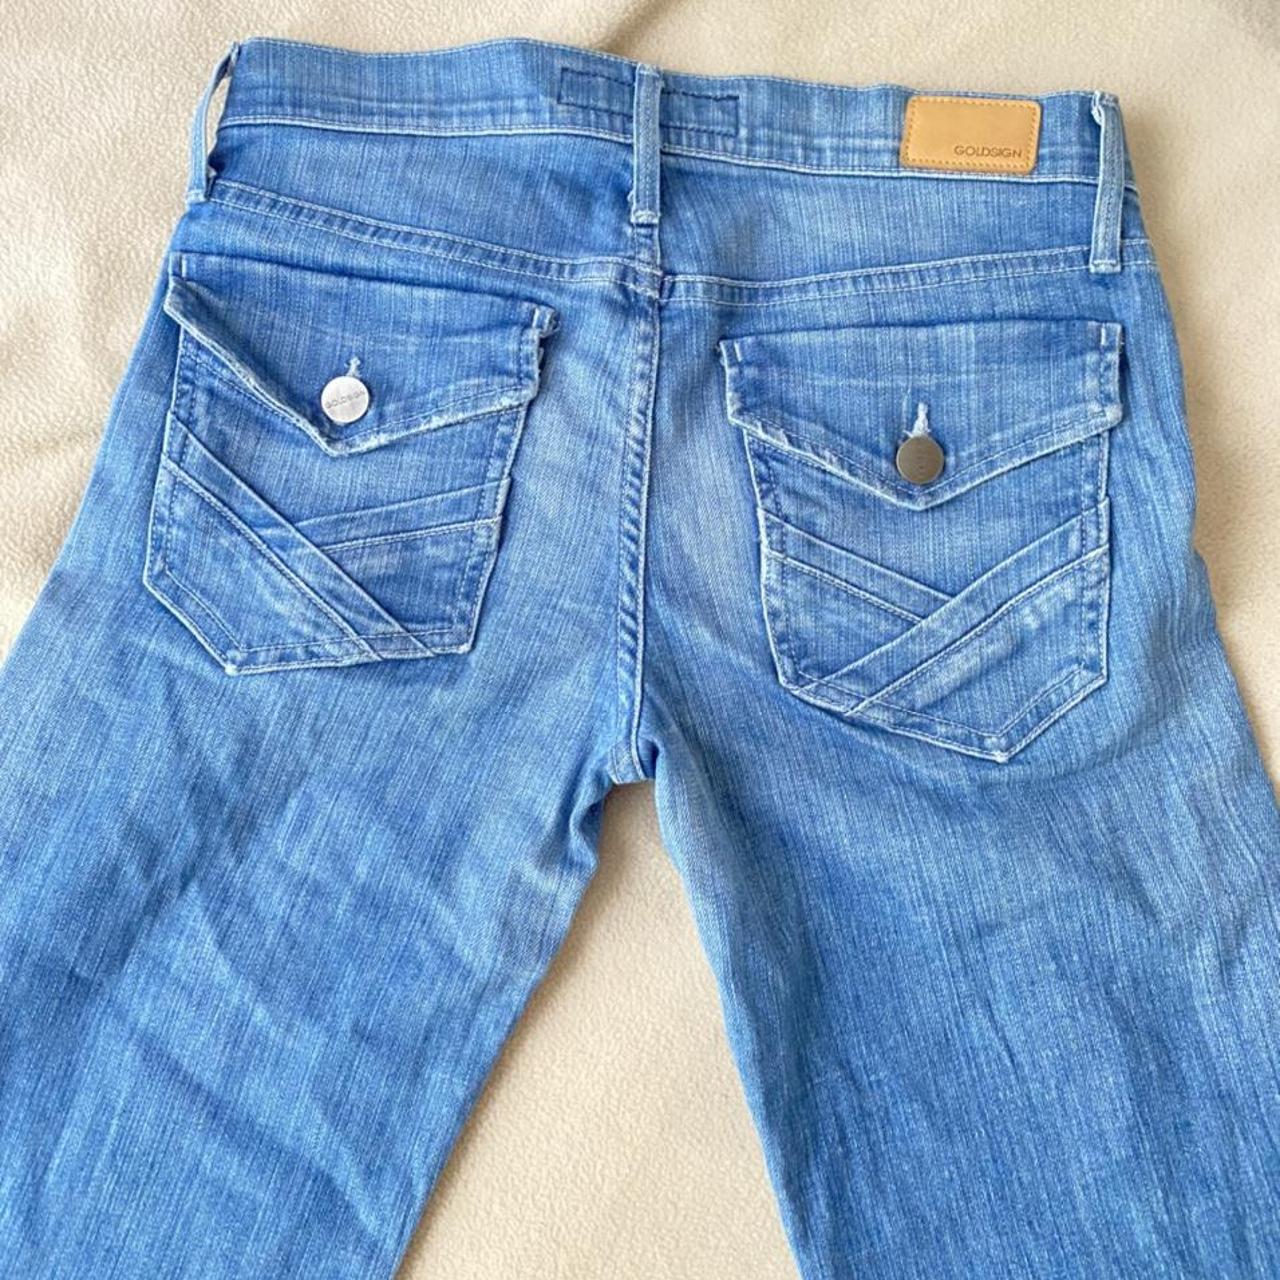 Product Image 4 - Jeans size 27 but could